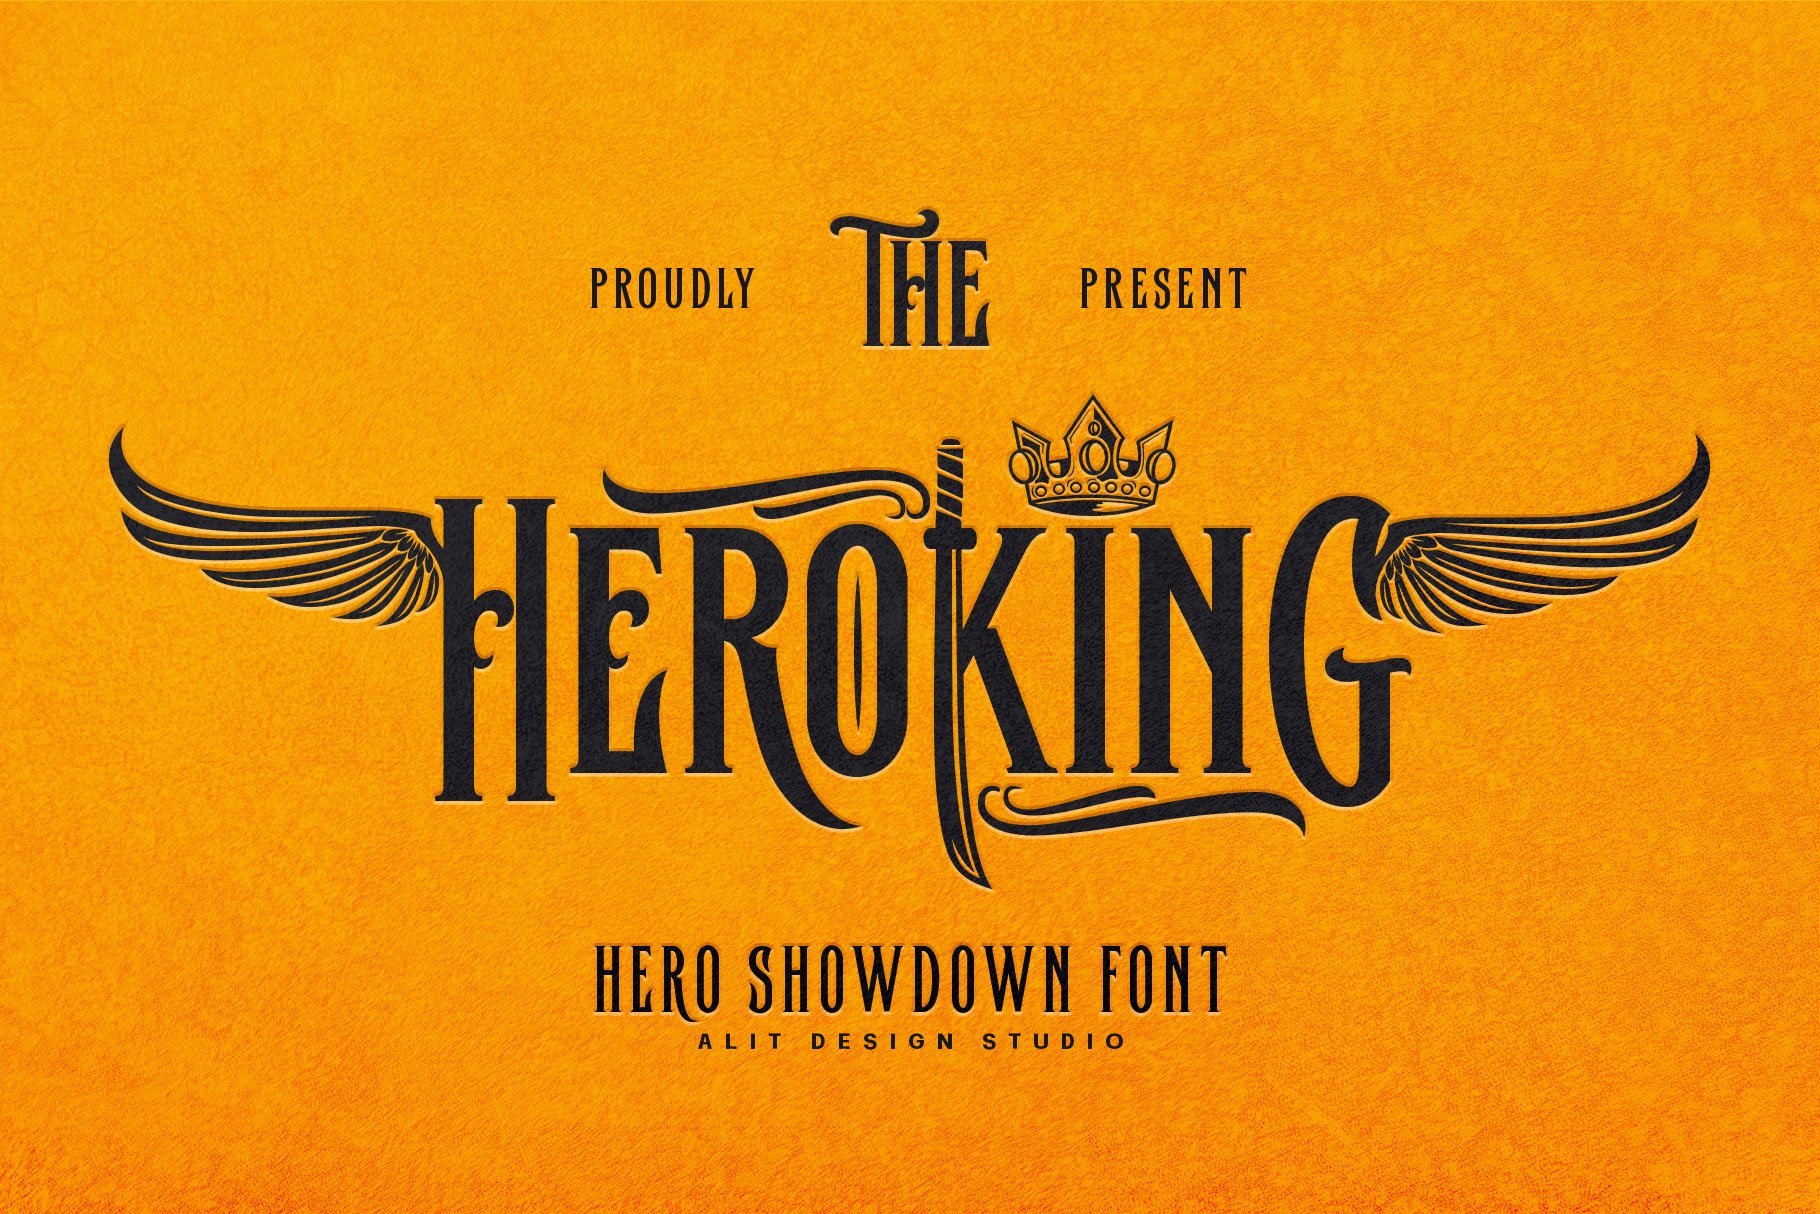 The Hero King Typeface cover image.